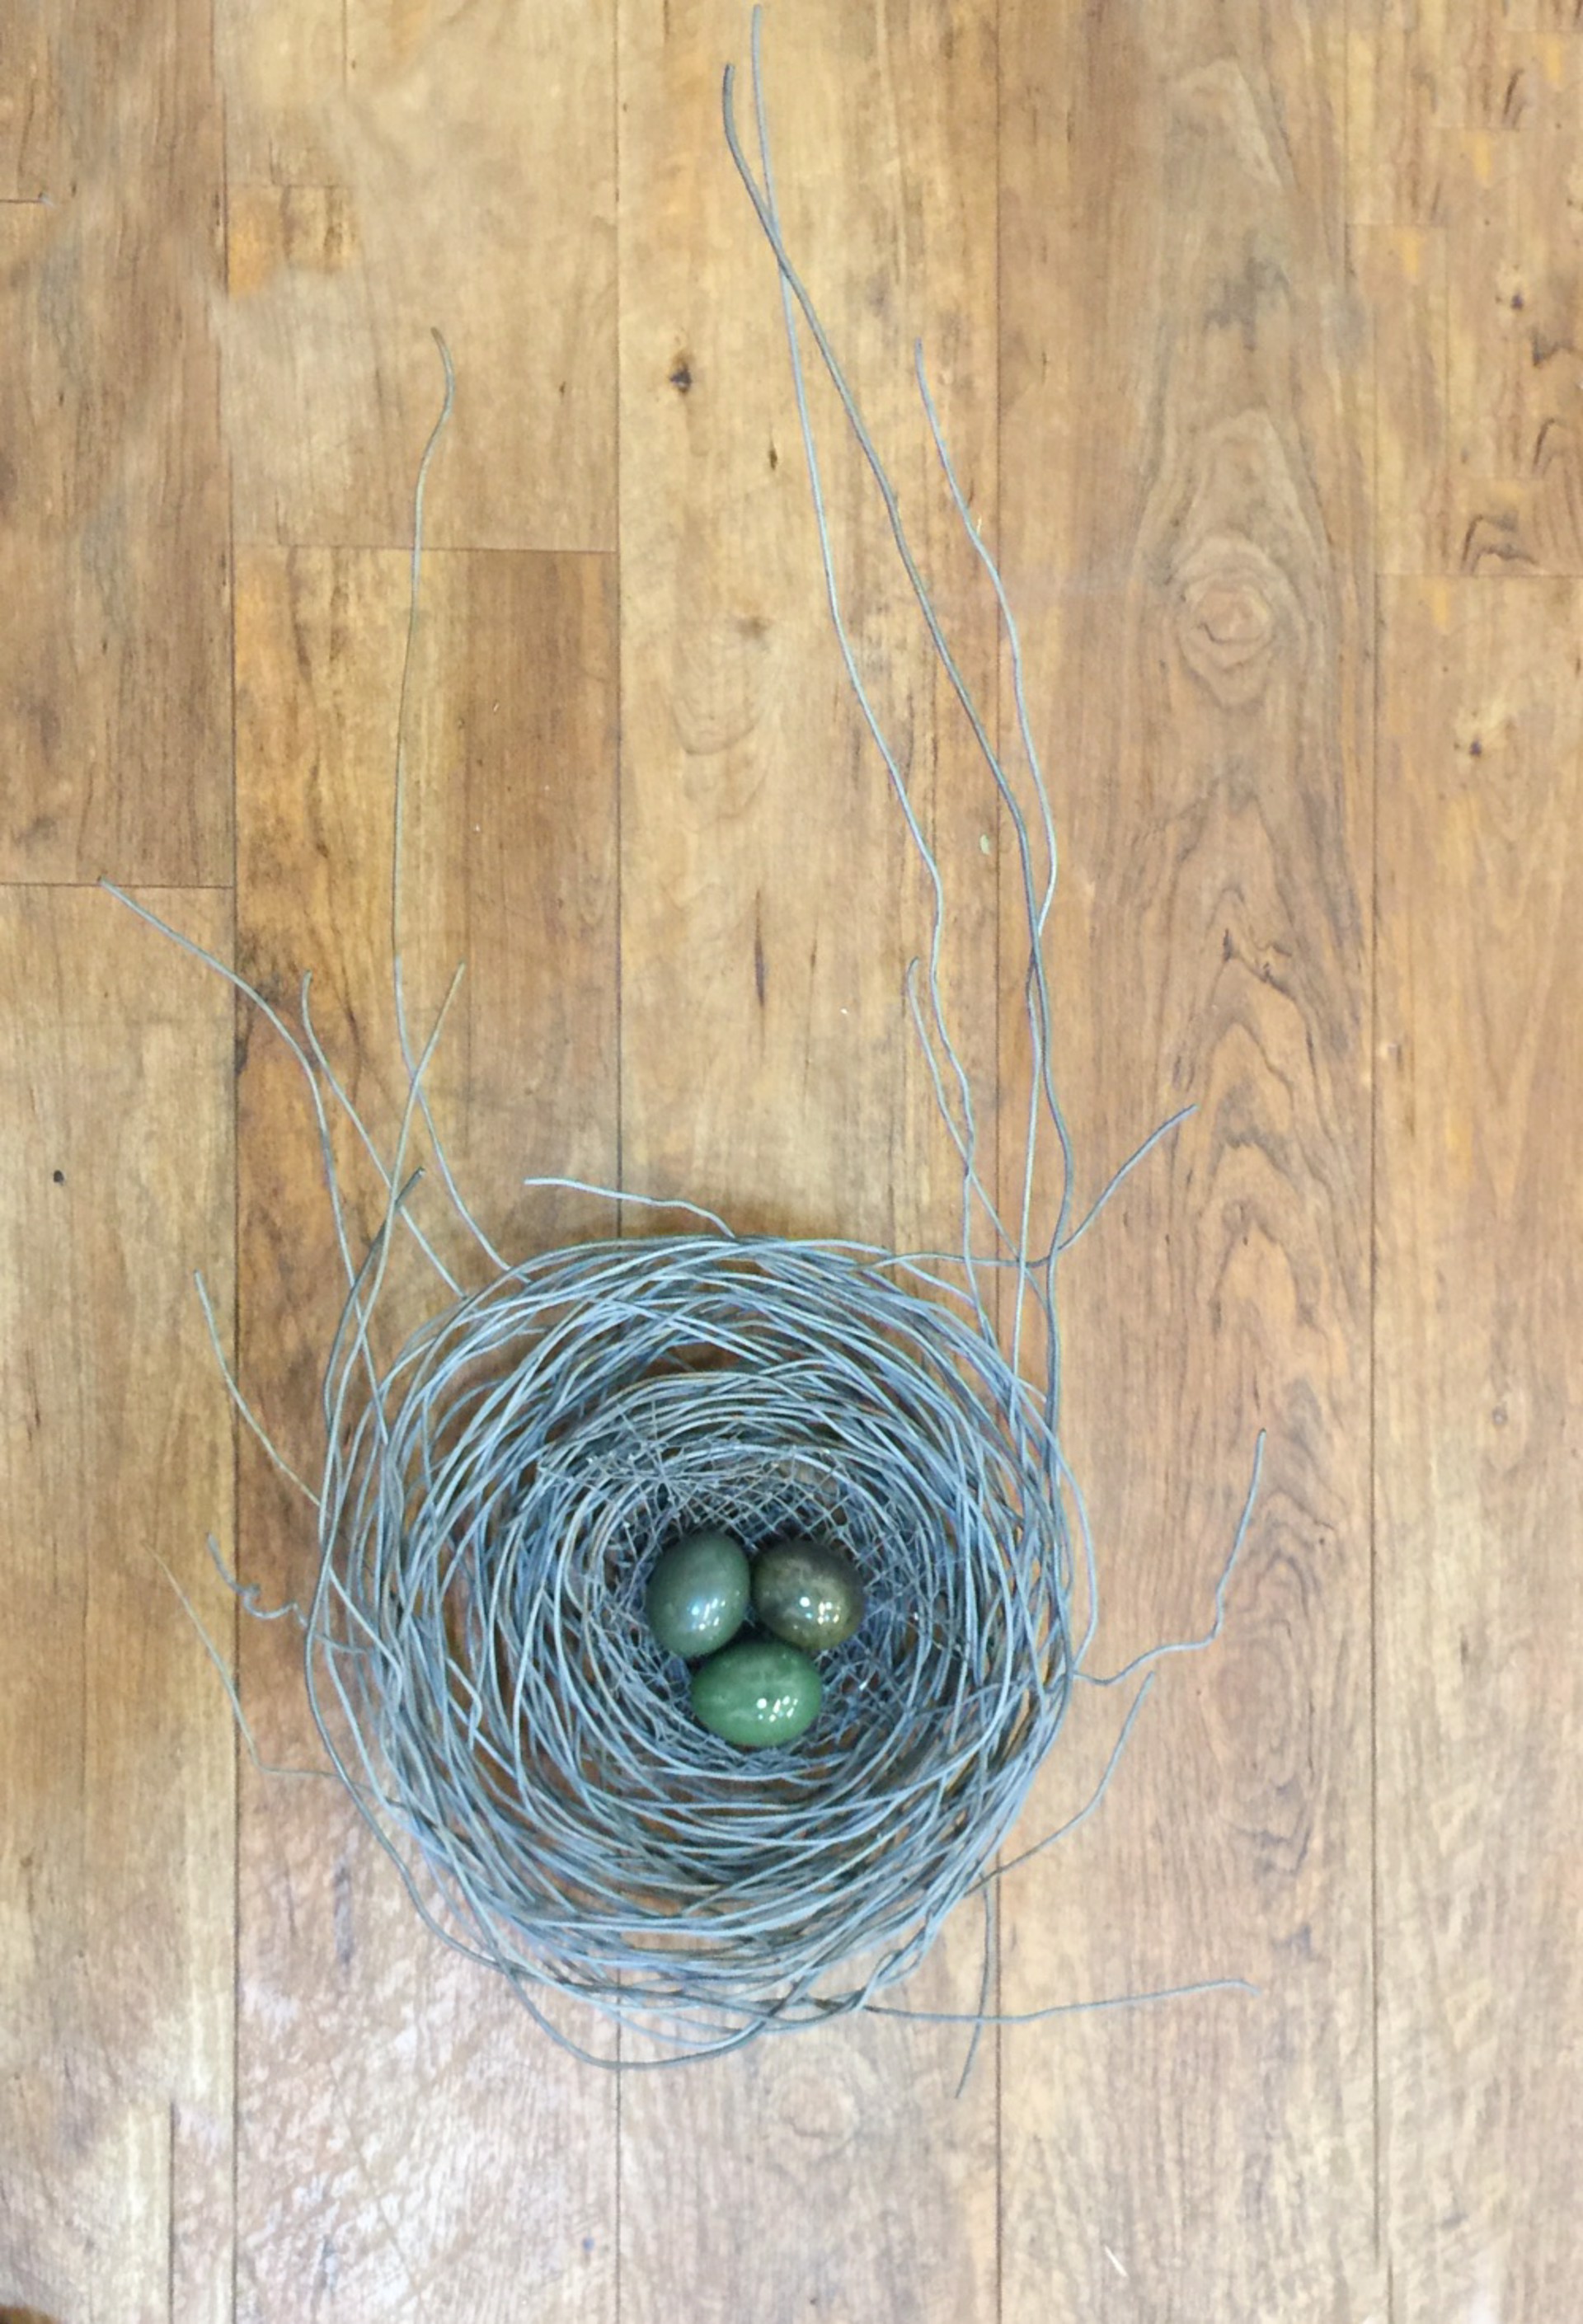 Hand Woven Grey Wire Nest With 3 Green Ceramic Eggs - 1318 by Phil Lichtenhan